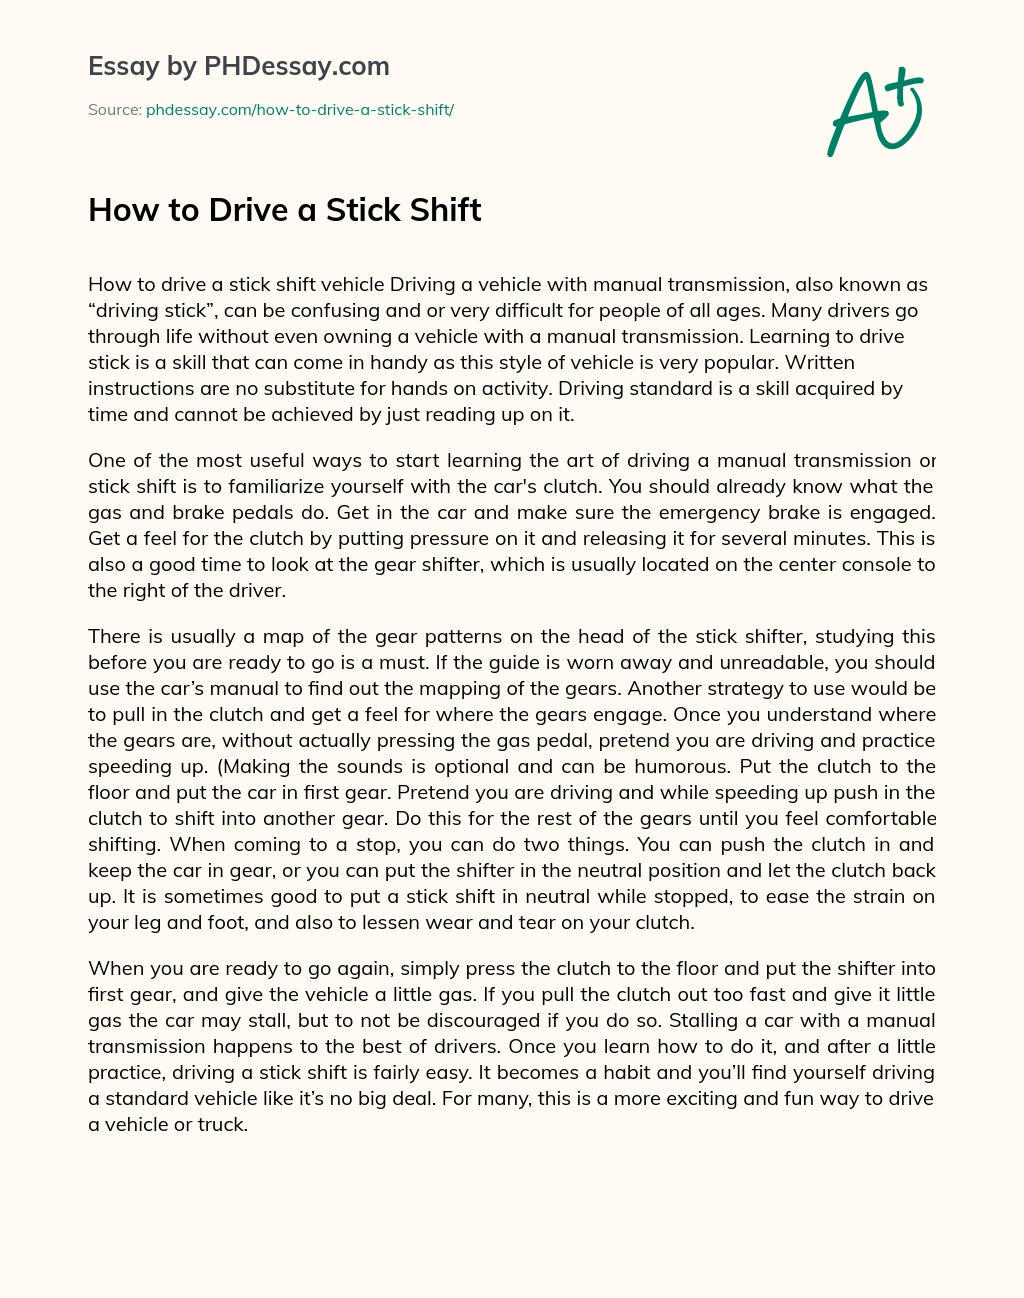 How to Drive a Stick Shift essay